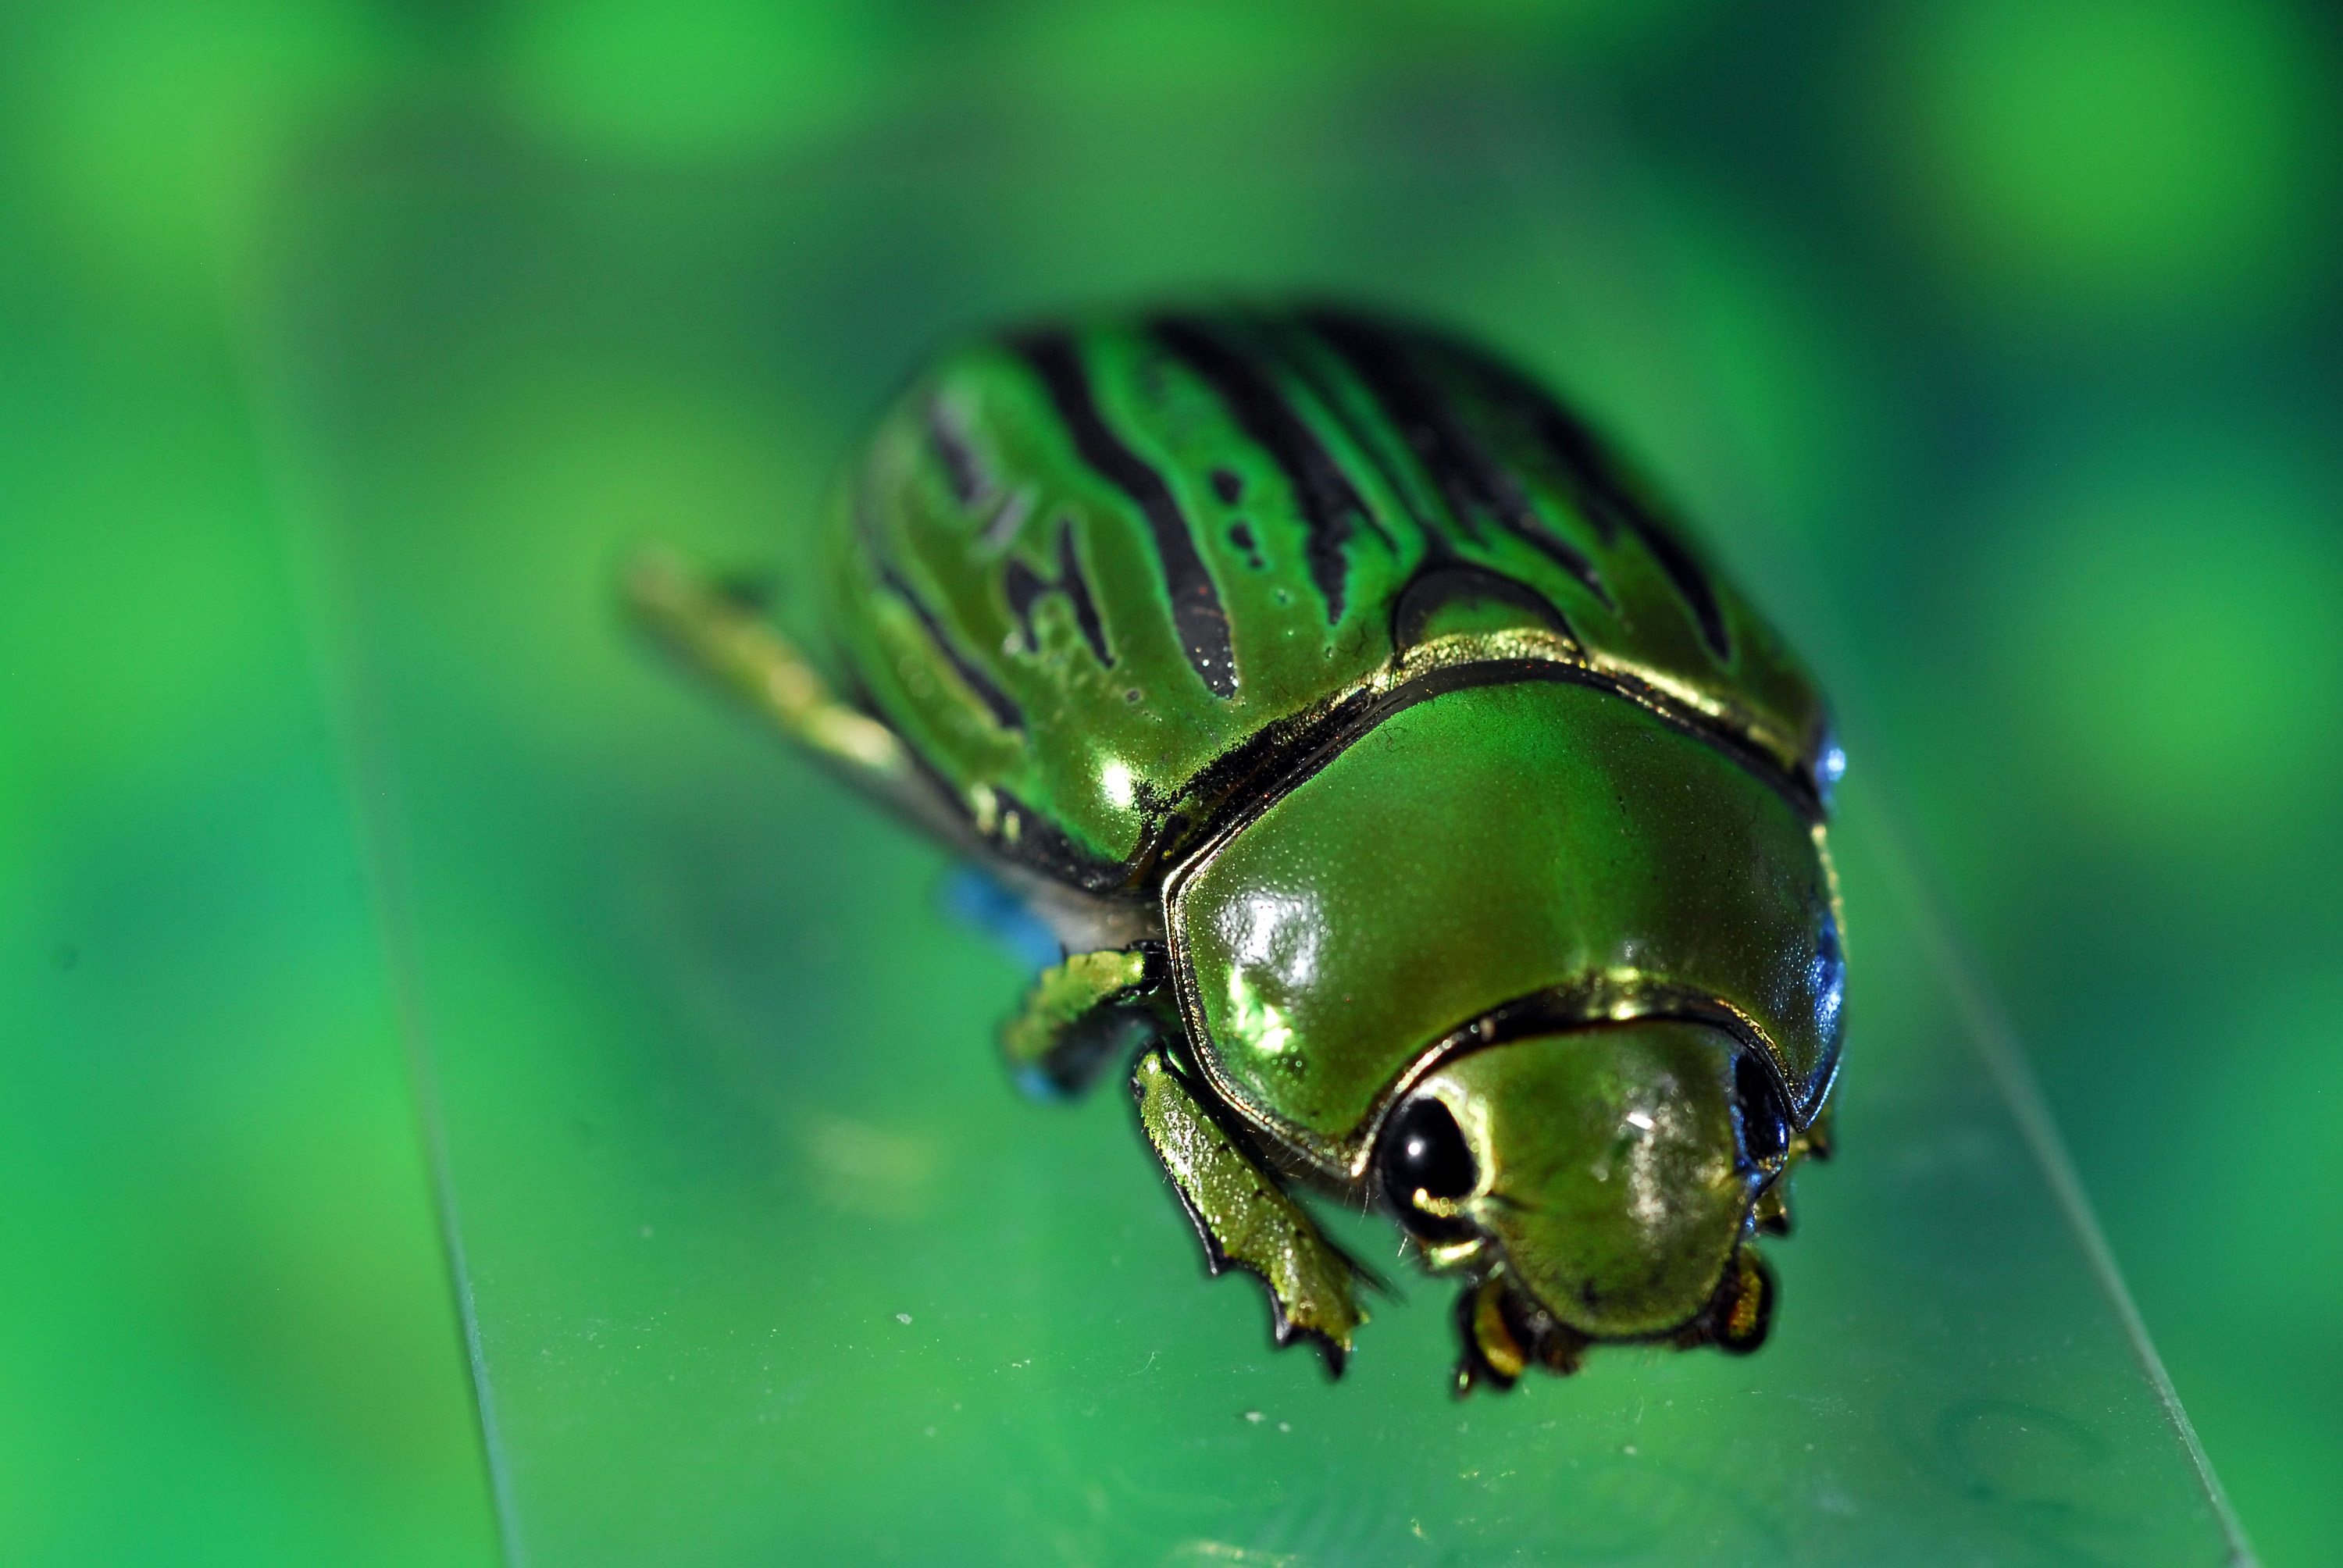 Researchers study iridescence in jeweled beetle shells.